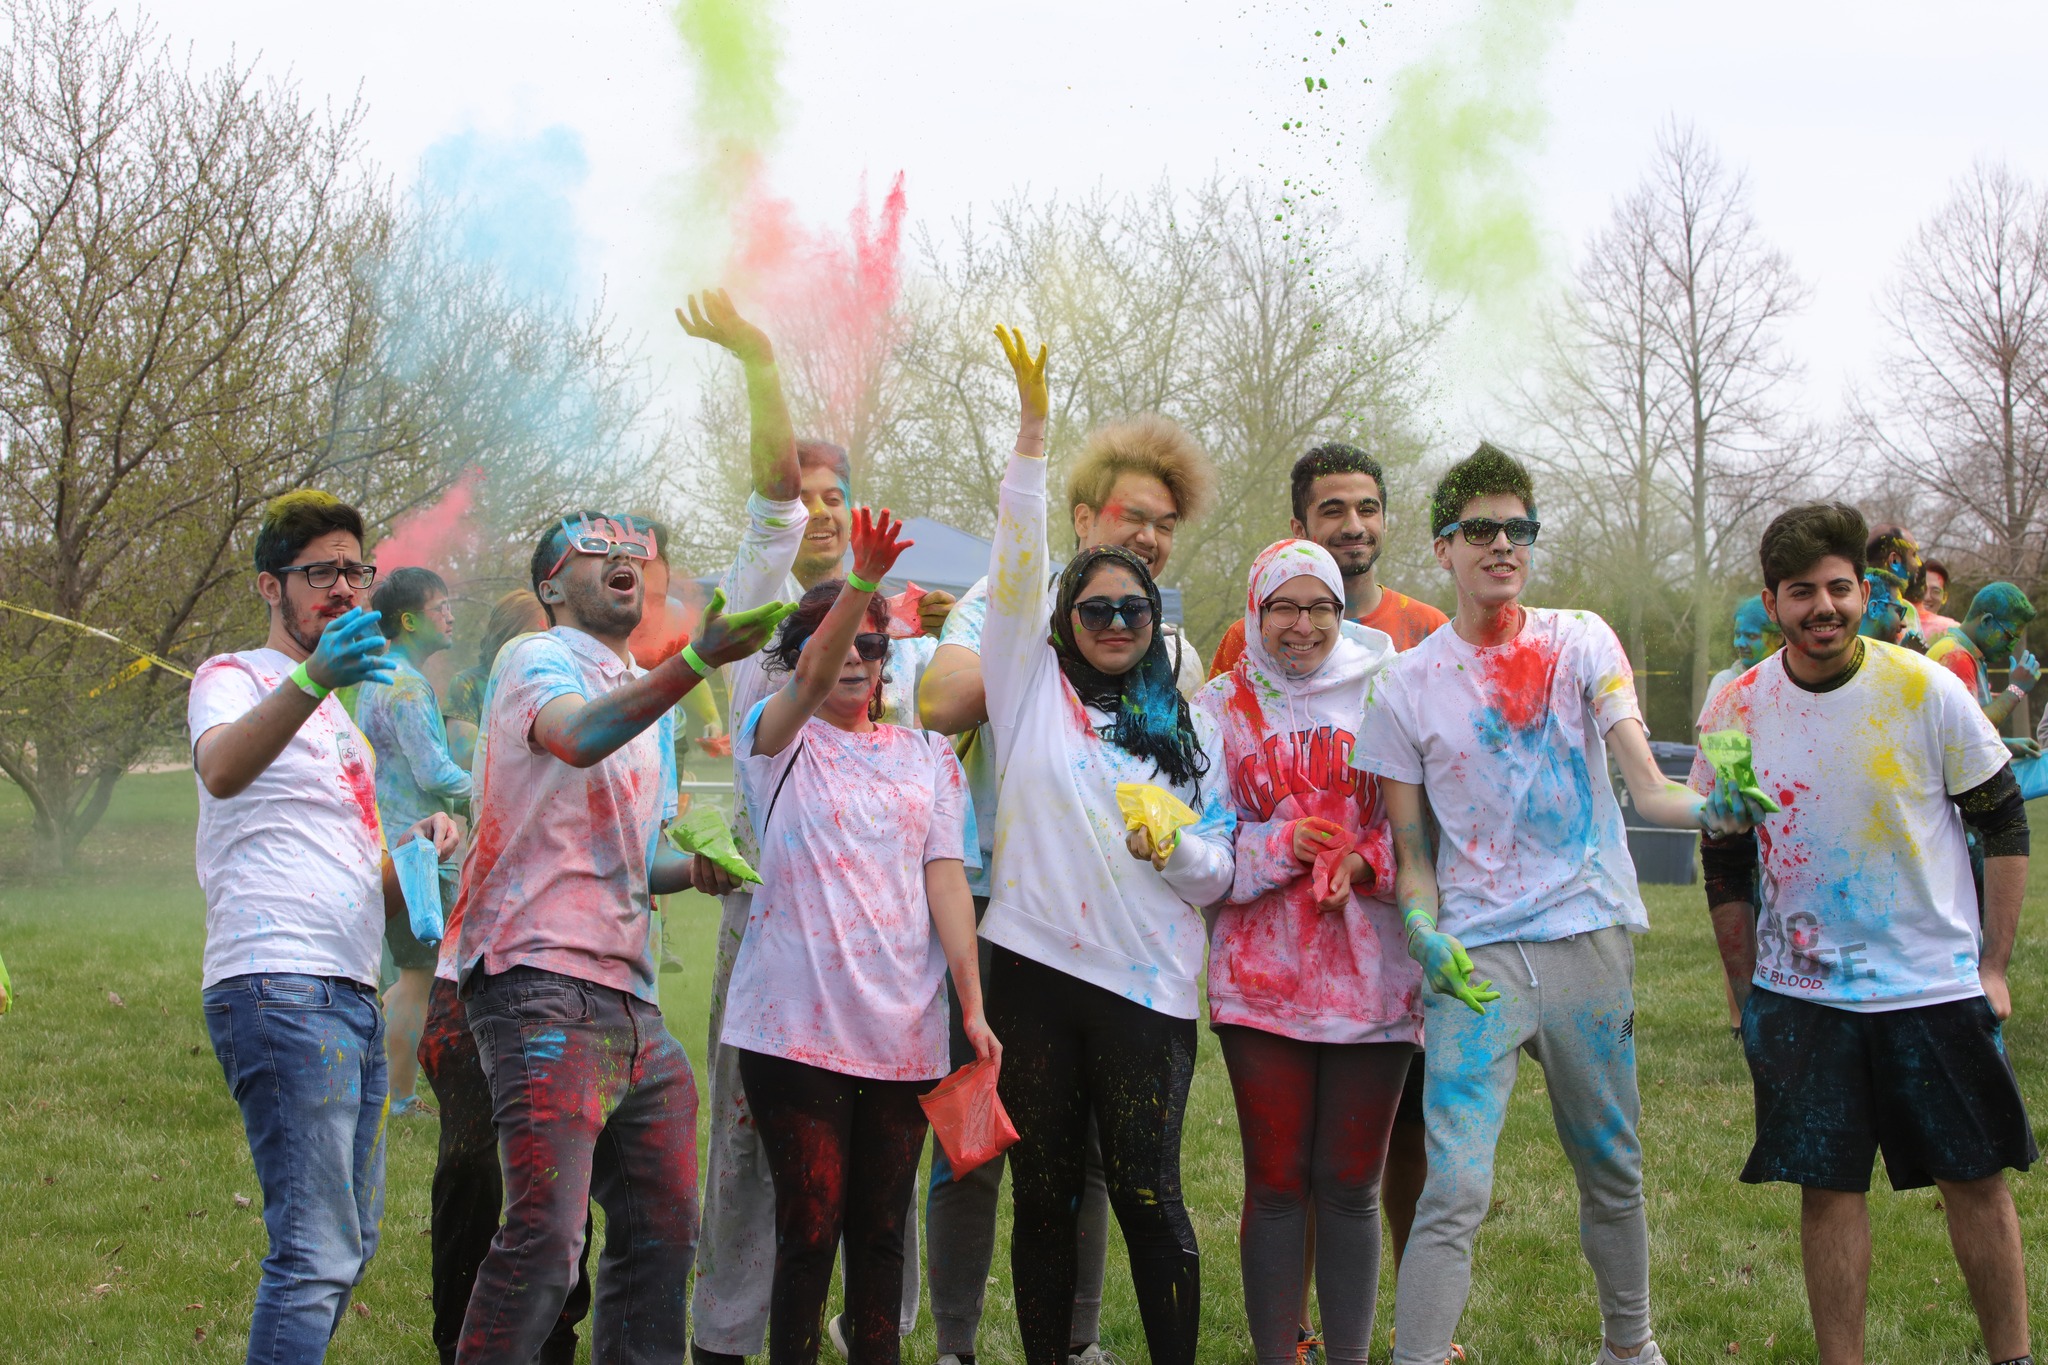 A group of young people in white t-shirts celebrate Holi. Their shirts are stained with colorful paint, and they are all throwing colorful paint/powder into the air. Photo from the Asha for Education â€” UIUC Facebook page.